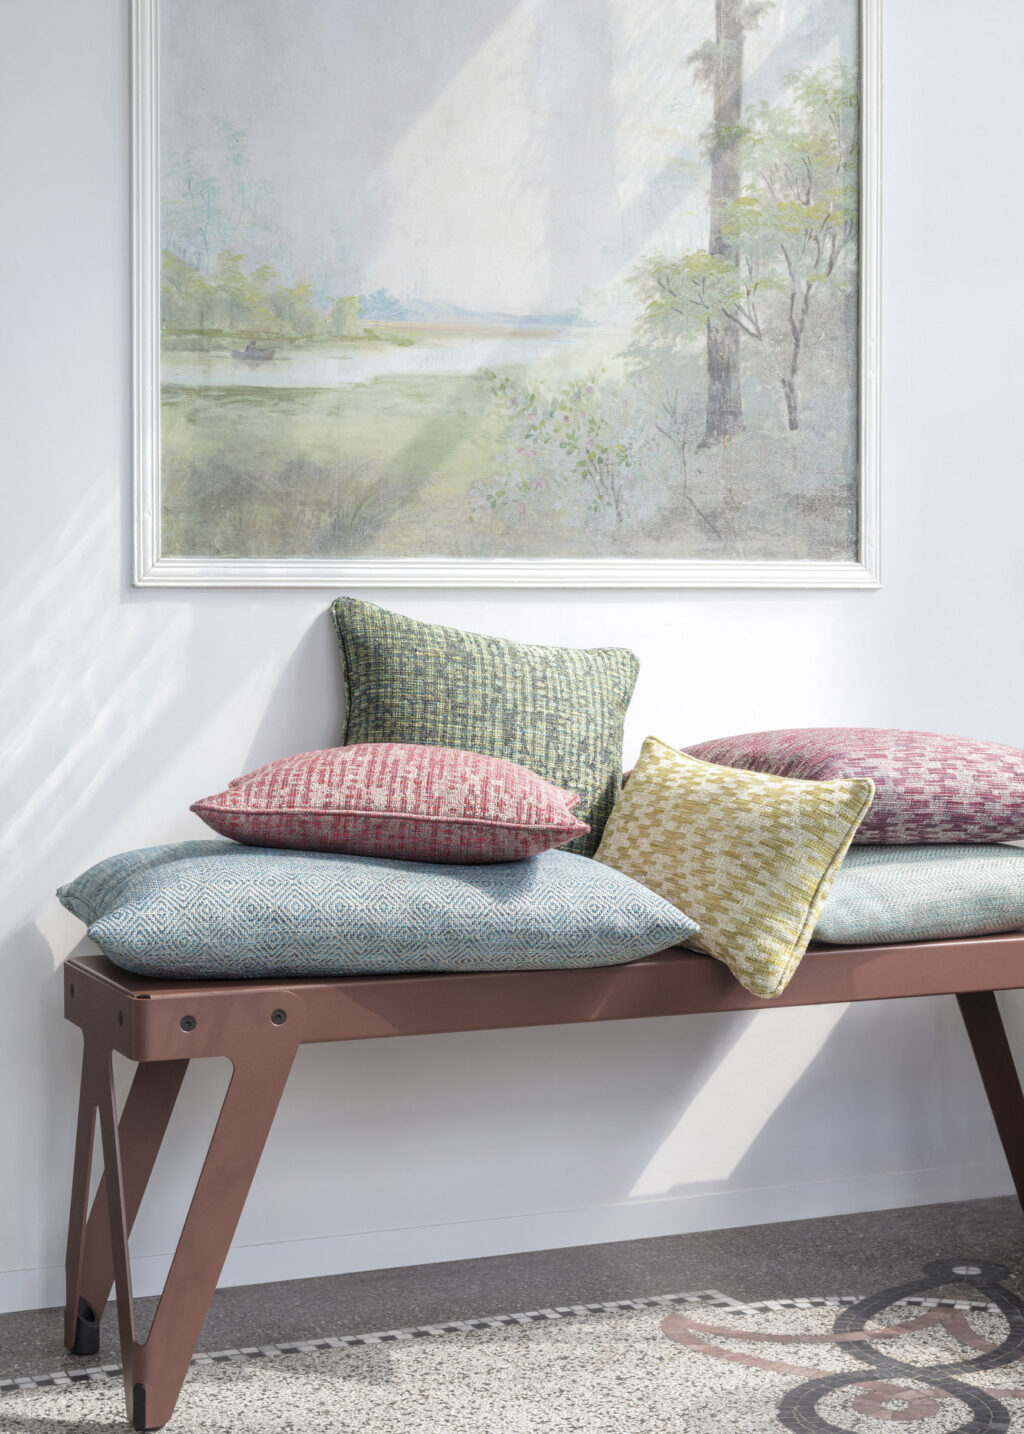 bench in sunlight with colourful pillows in easy clean fibreguard fabrics